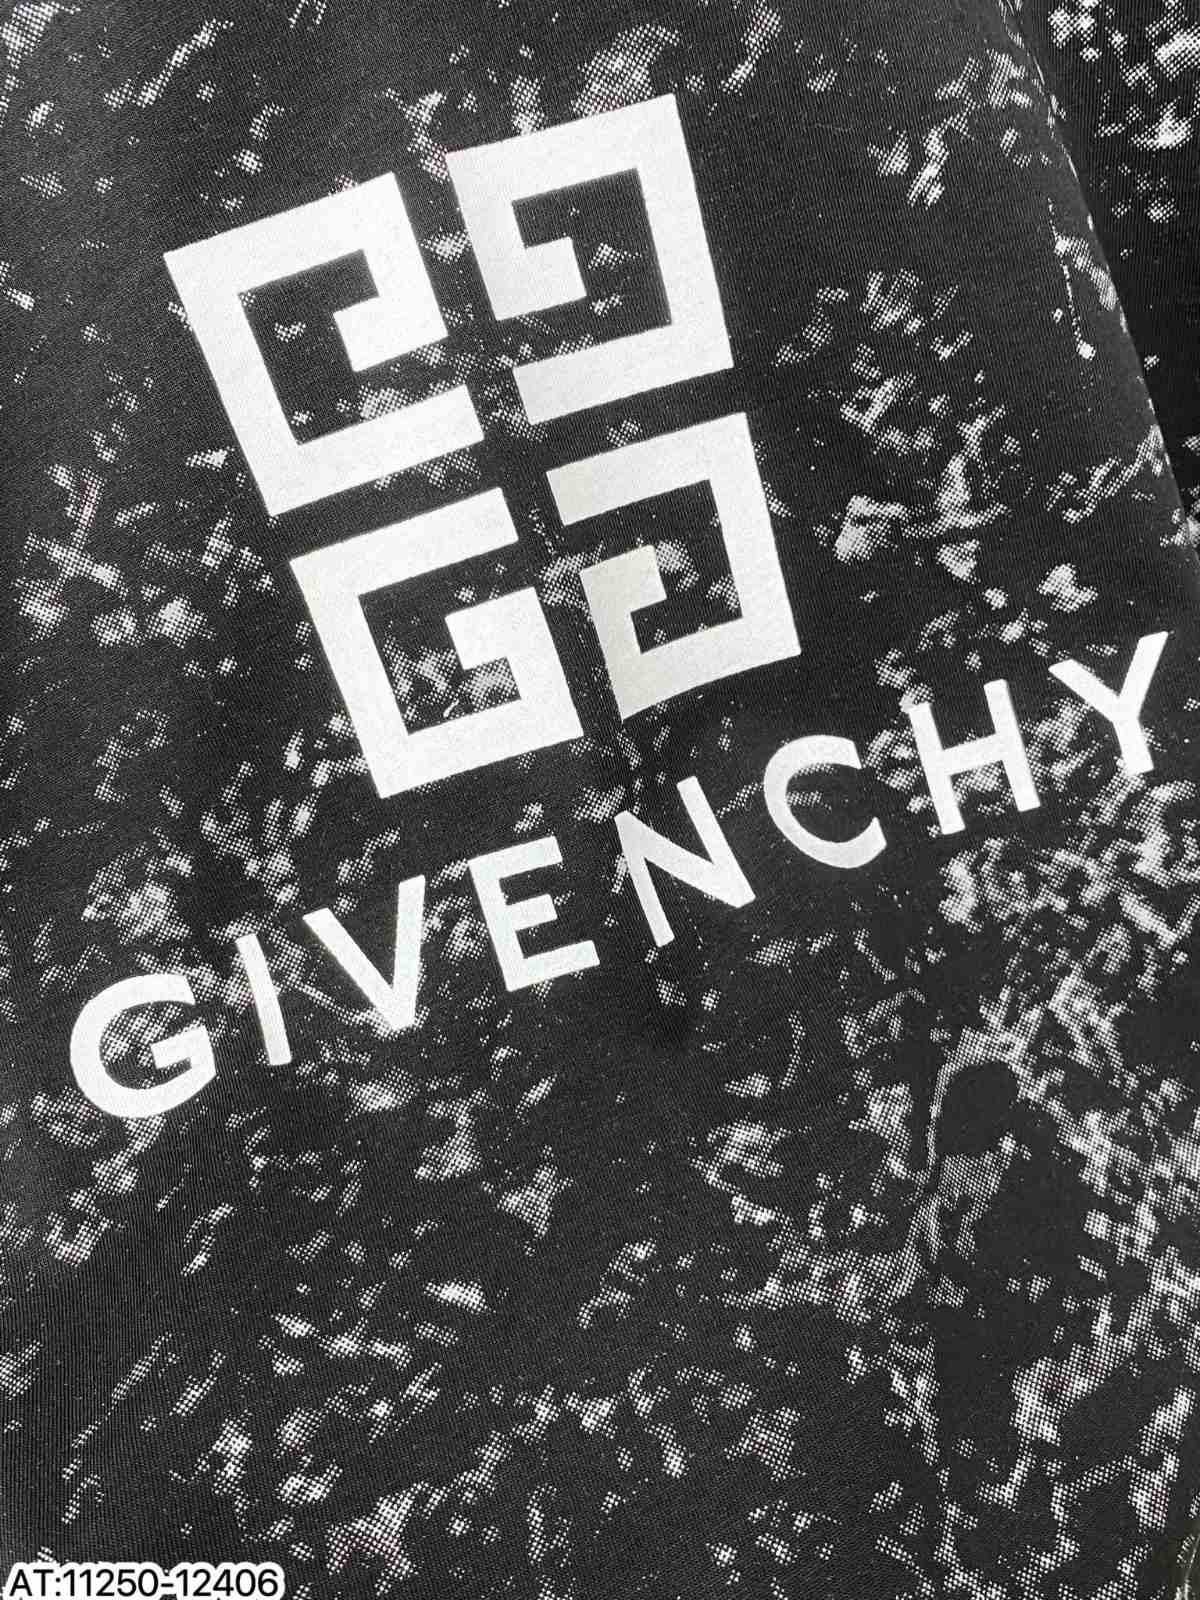 Givenchy F/W 21 Show (Givenchy)